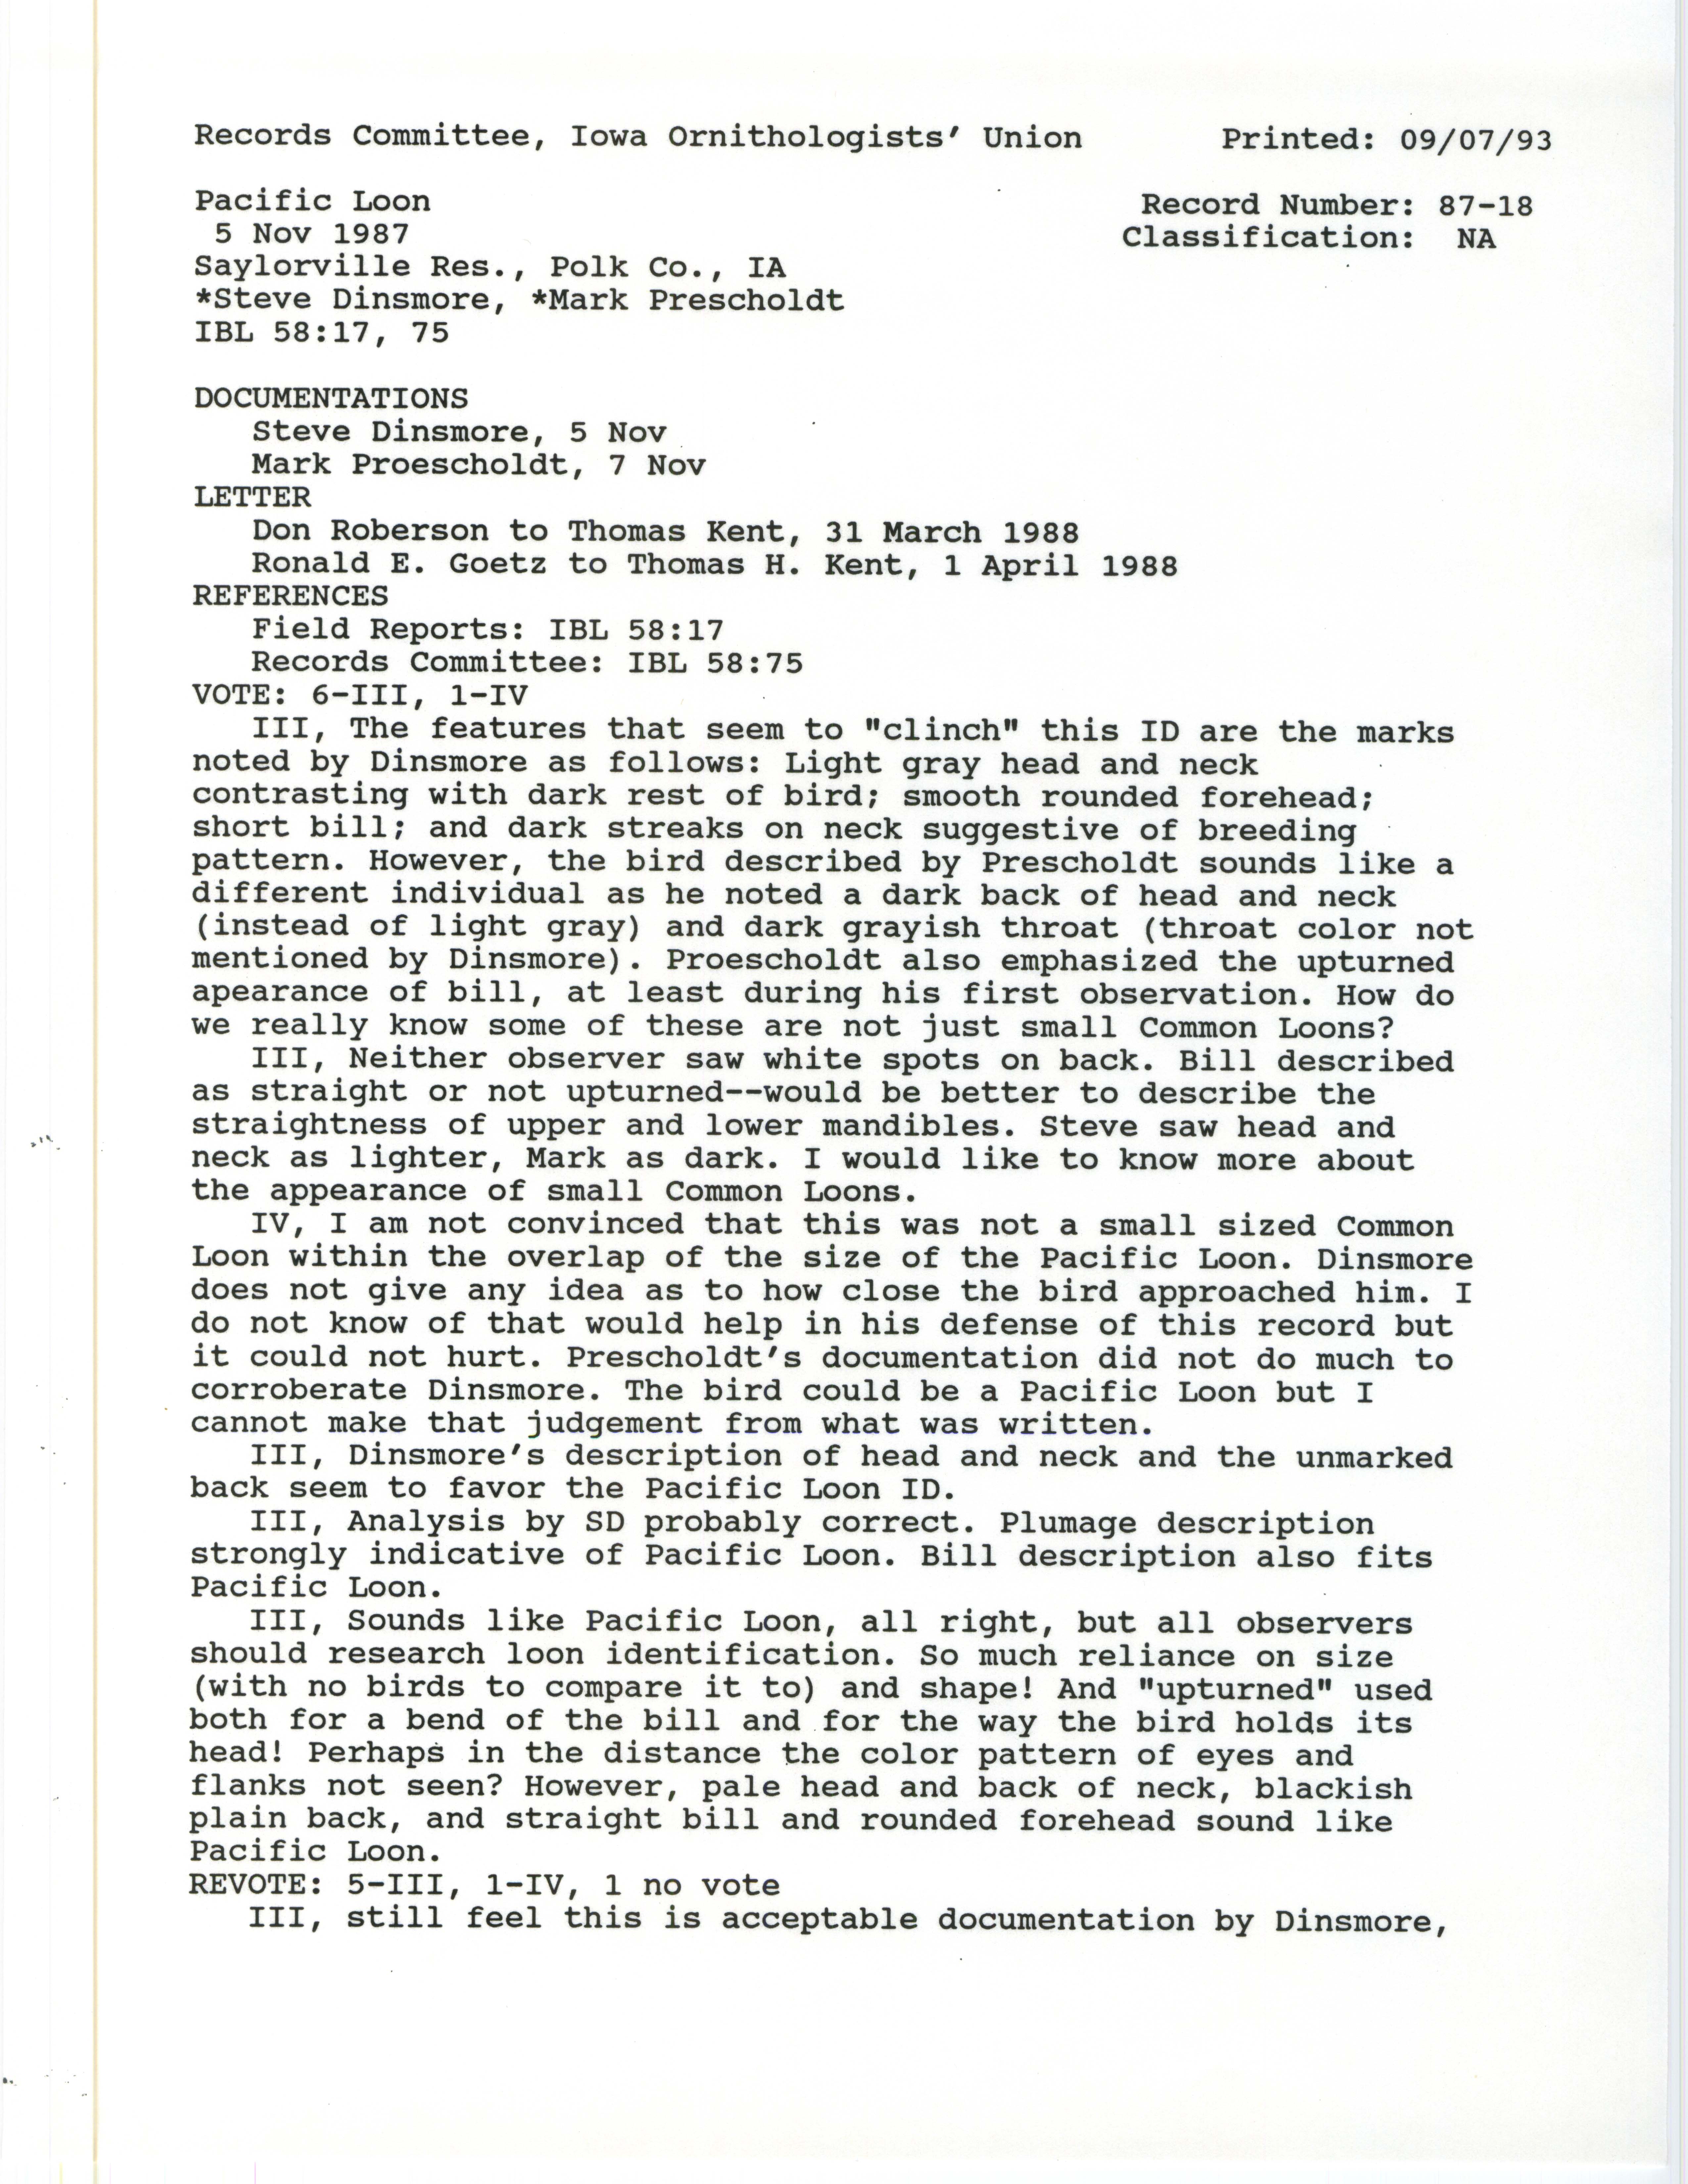 Records Committee review for rare bird sighting of a Pacific Loon at Saylorville Resevoir, 1987